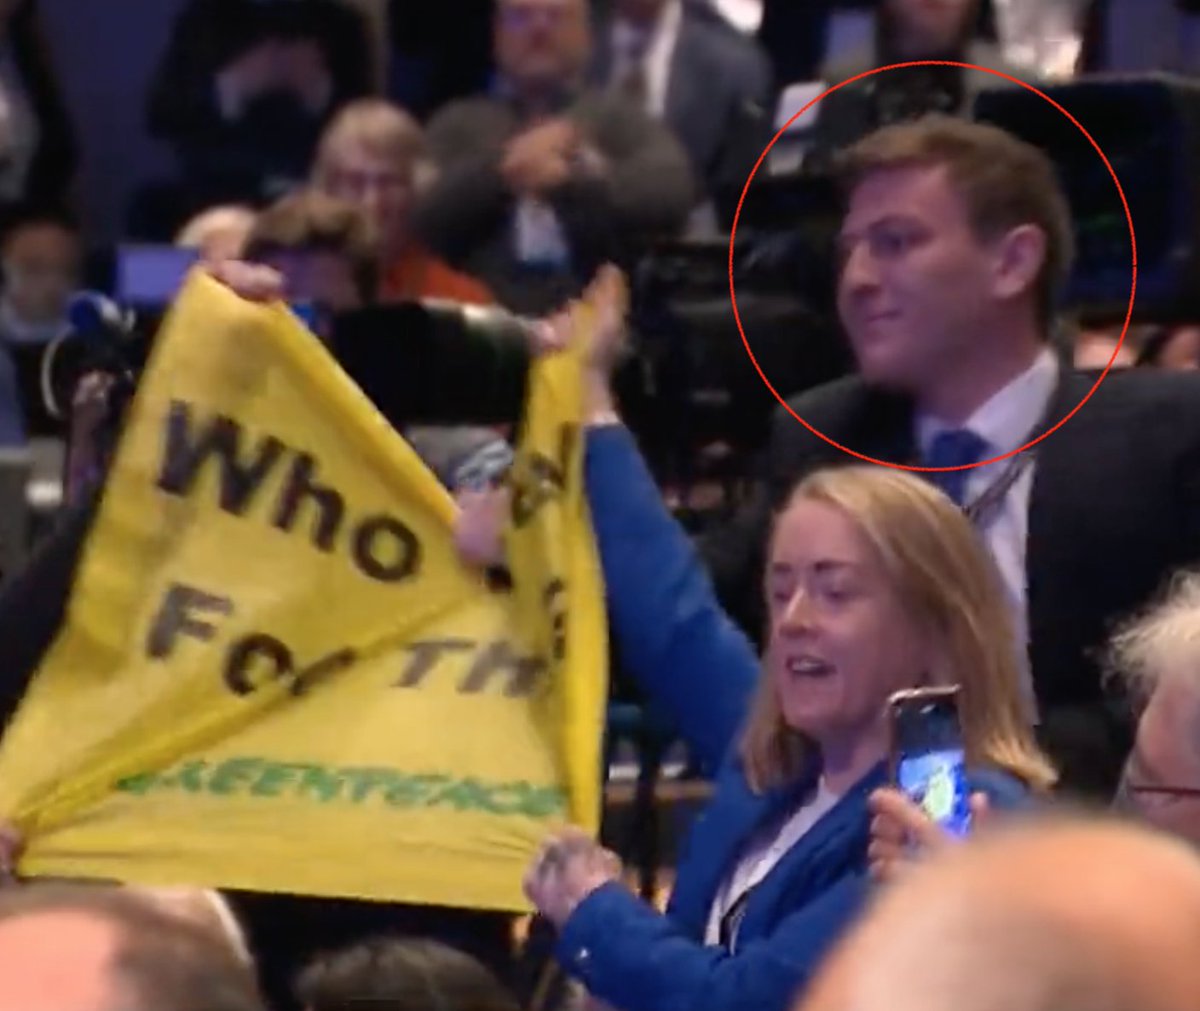 Who is this smuggly stealing the flag?
#WhoVotedForThis #CPC22